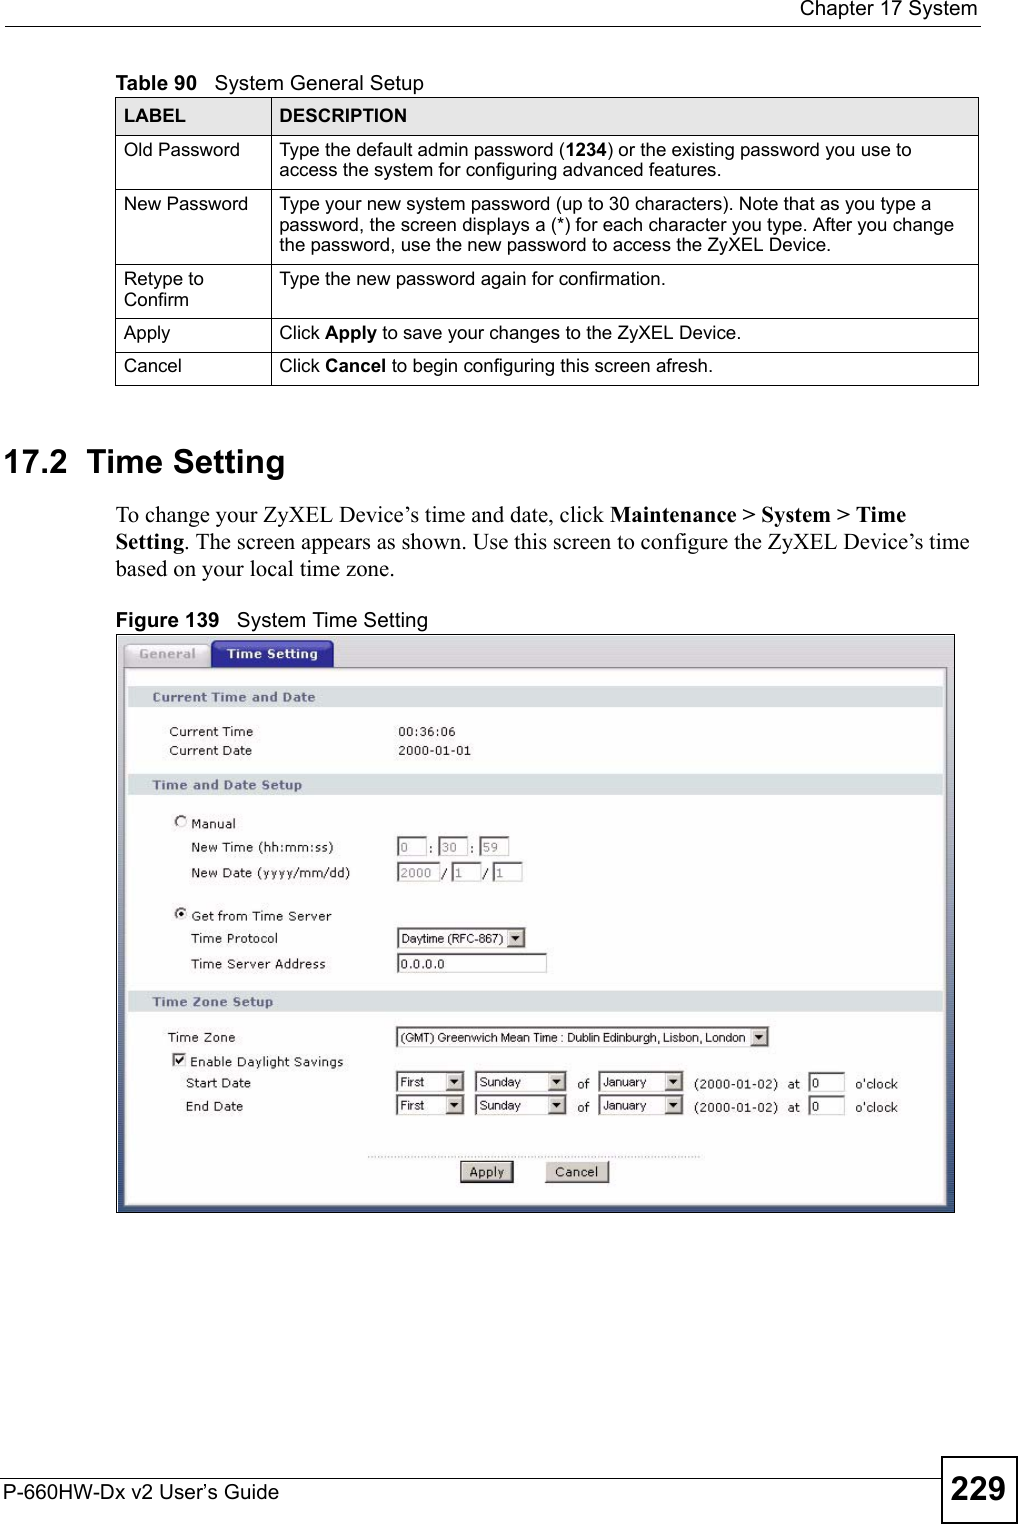  Chapter 17 SystemP-660HW-Dx v2 User’s Guide 22917.2  Time Setting To change your ZyXEL Device’s time and date, click Maintenance &gt; System &gt; Time Setting. The screen appears as shown. Use this screen to configure the ZyXEL Device’s time based on your local time zone. Figure 139   System Time SettingOld Password Type the default admin password (1234) or the existing password you use to access the system for configuring advanced features.New Password Type your new system password (up to 30 characters). Note that as you type a password, the screen displays a (*) for each character you type. After you change the password, use the new password to access the ZyXEL Device.Retype to ConfirmType the new password again for confirmation.Apply Click Apply to save your changes to the ZyXEL Device.Cancel Click Cancel to begin configuring this screen afresh.Table 90   System General SetupLABEL DESCRIPTION